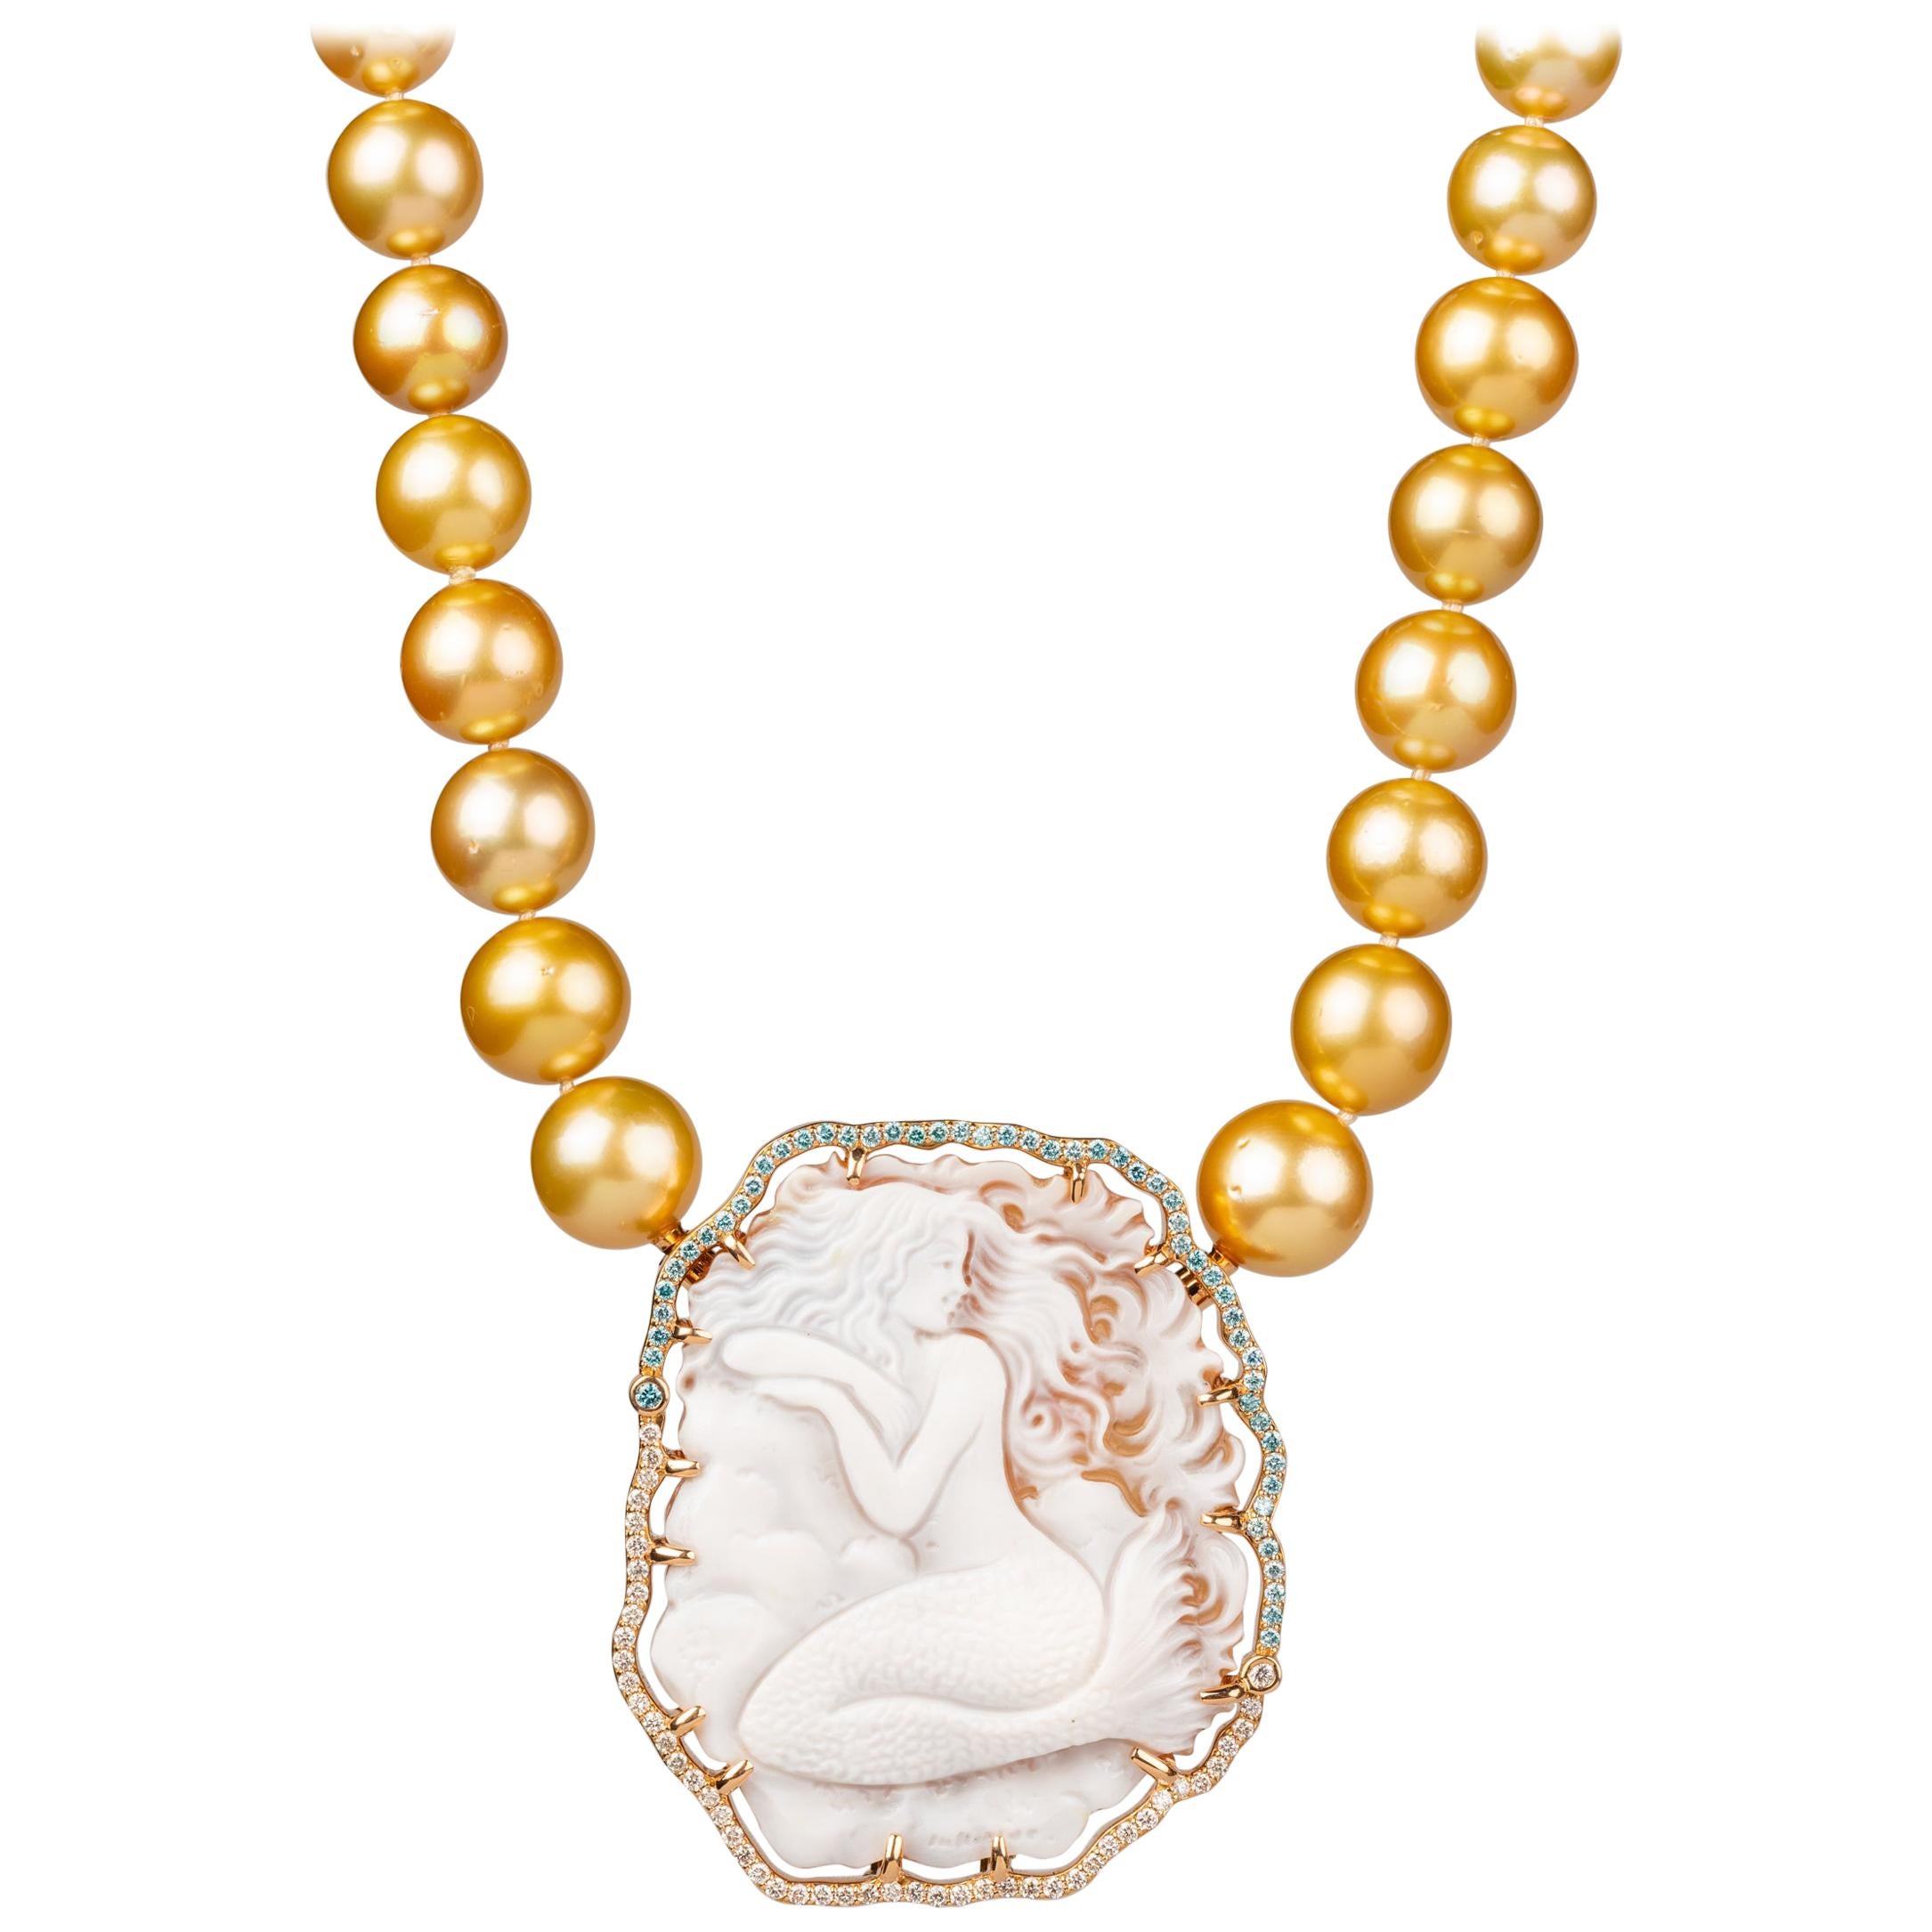 South Sea Golden Pearl Necklace with Mermaid Cameo Clasp and Brooch